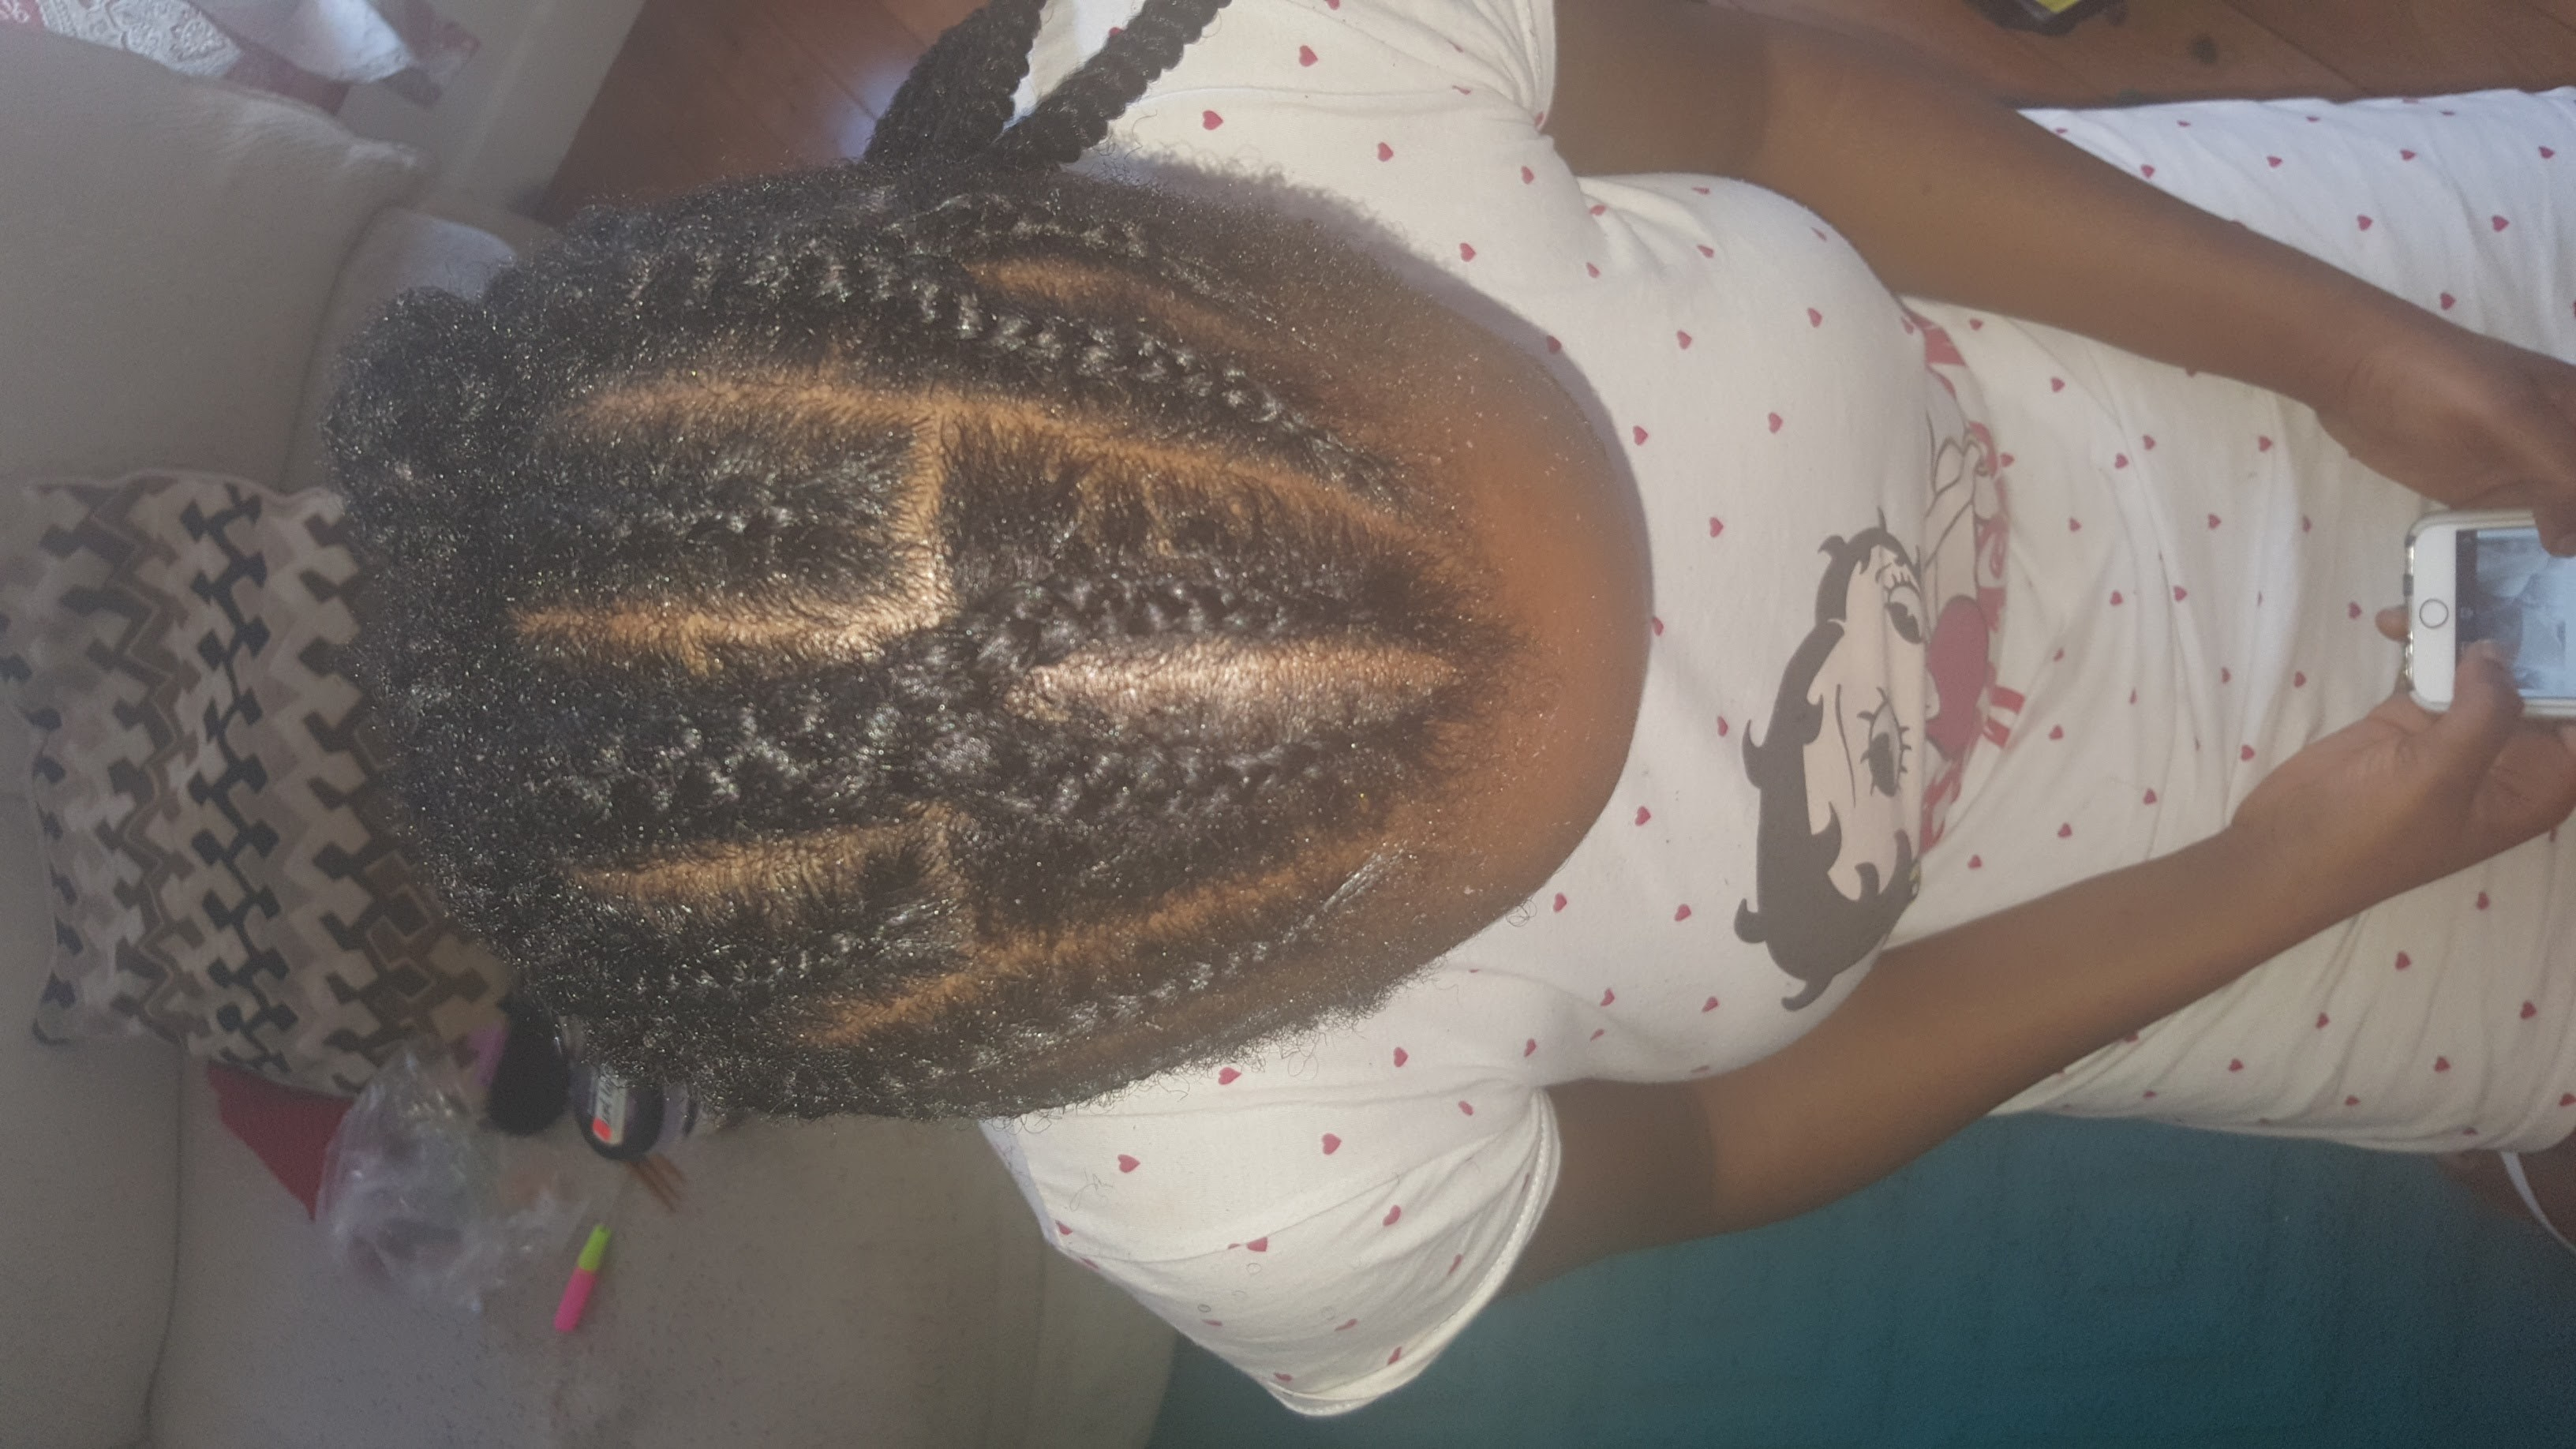 Crochet Braid Pattern For Ponytail 9 Braiding Patterns For Crochet Braids The Kink And I